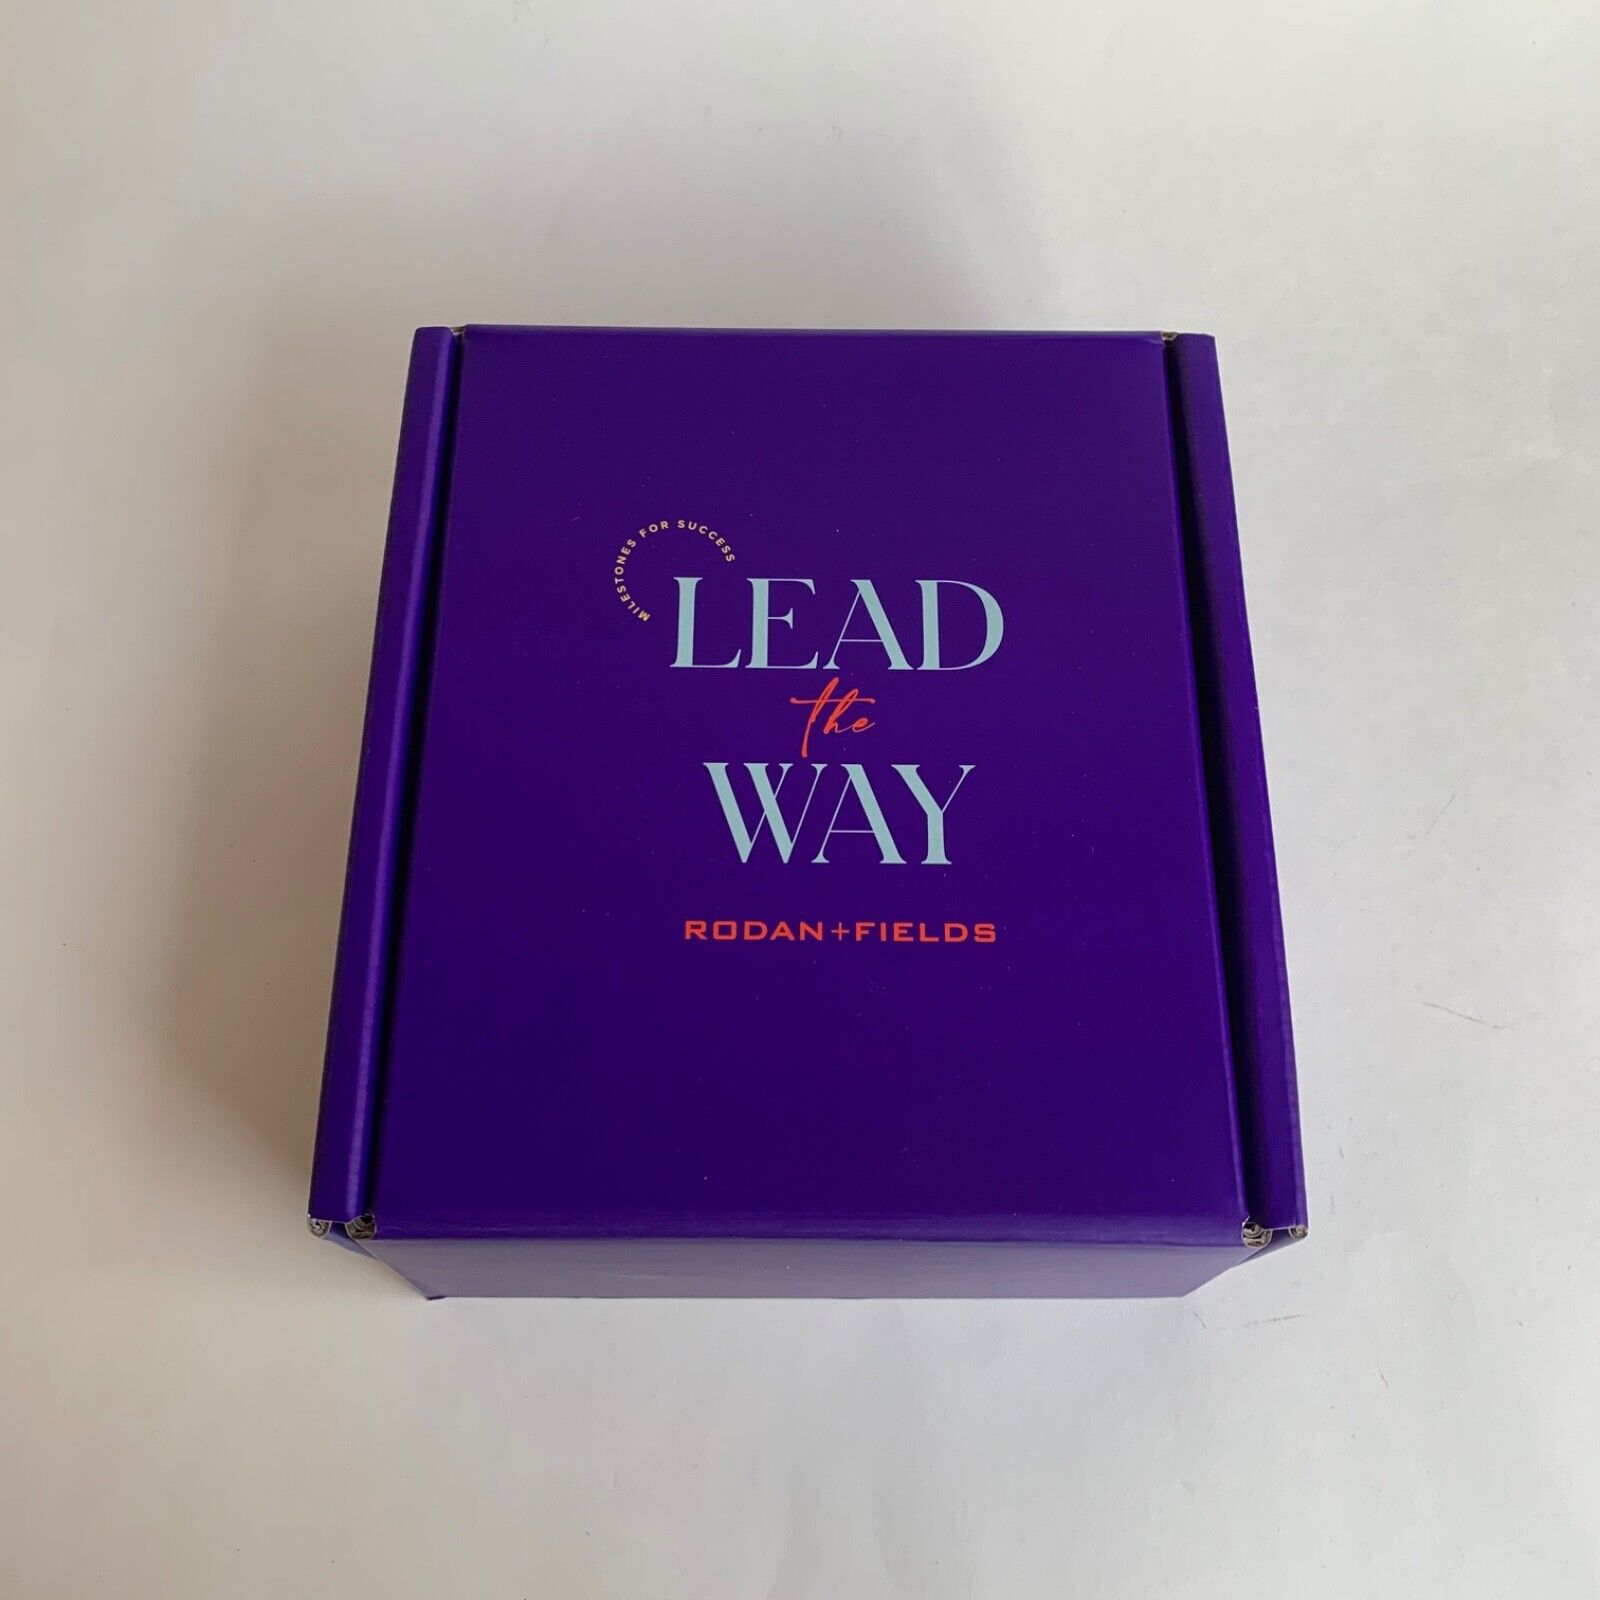 Lead the Way, Rodan + Fields Level 1 Boxed Set, Notebooks and Holder